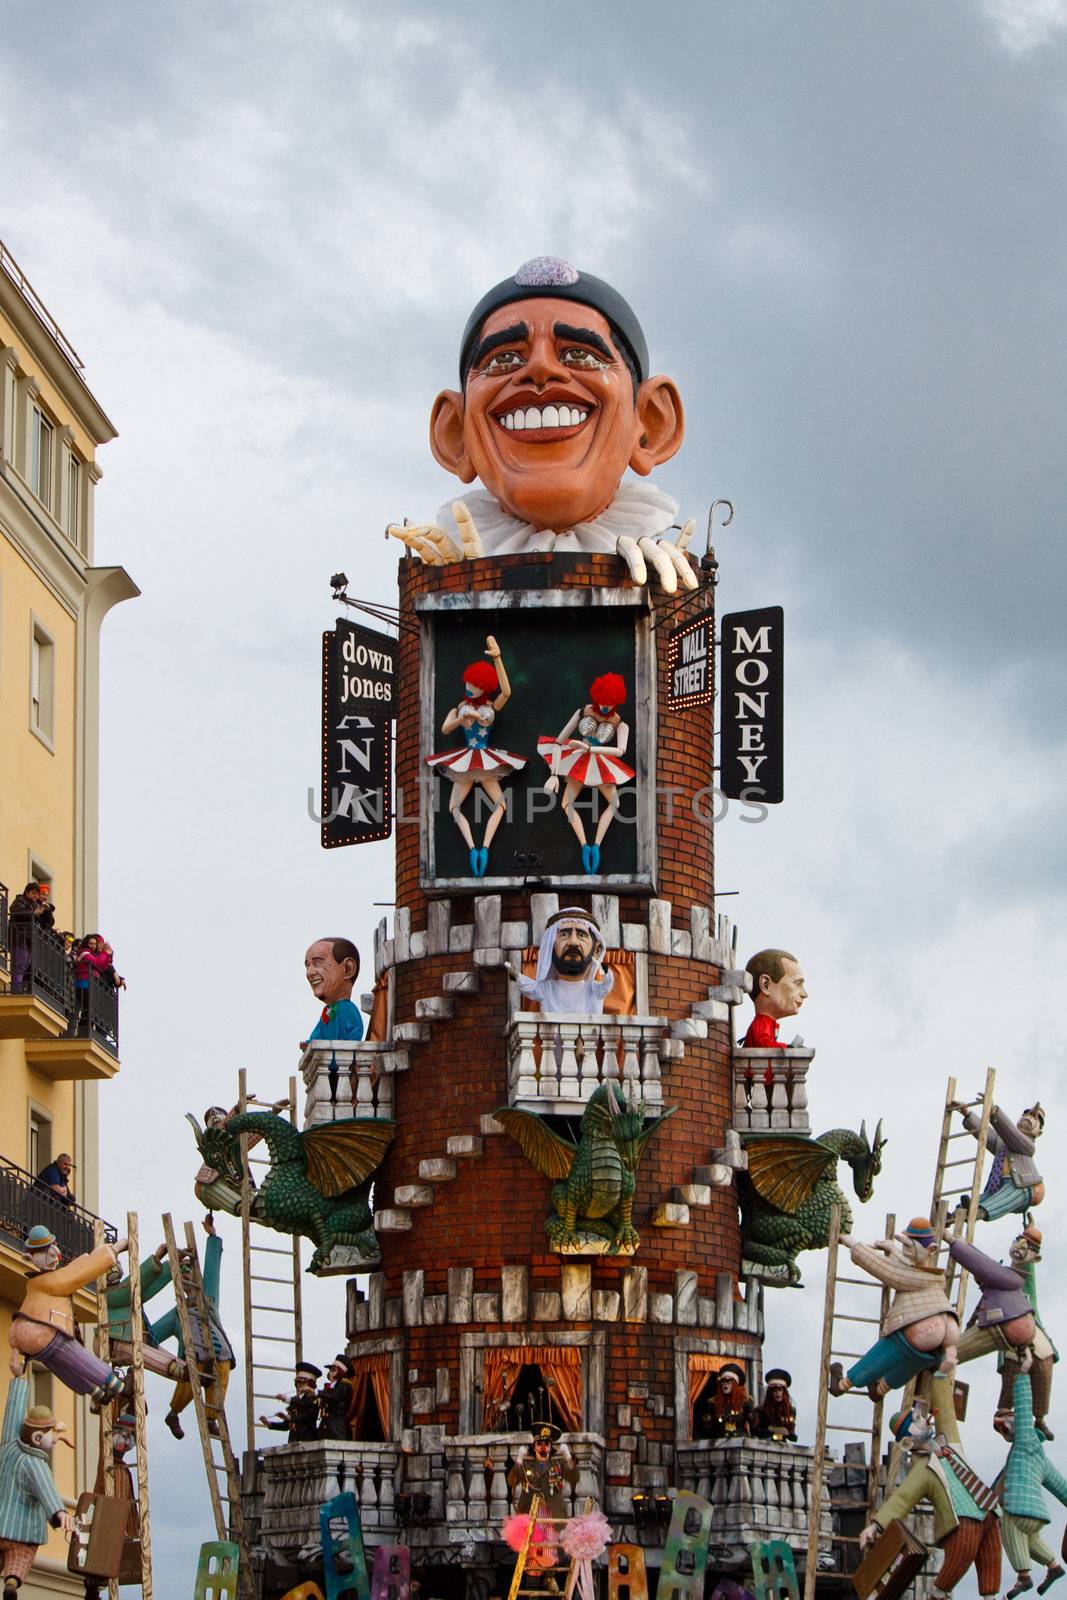 Carnival Float by FedericoPhoto